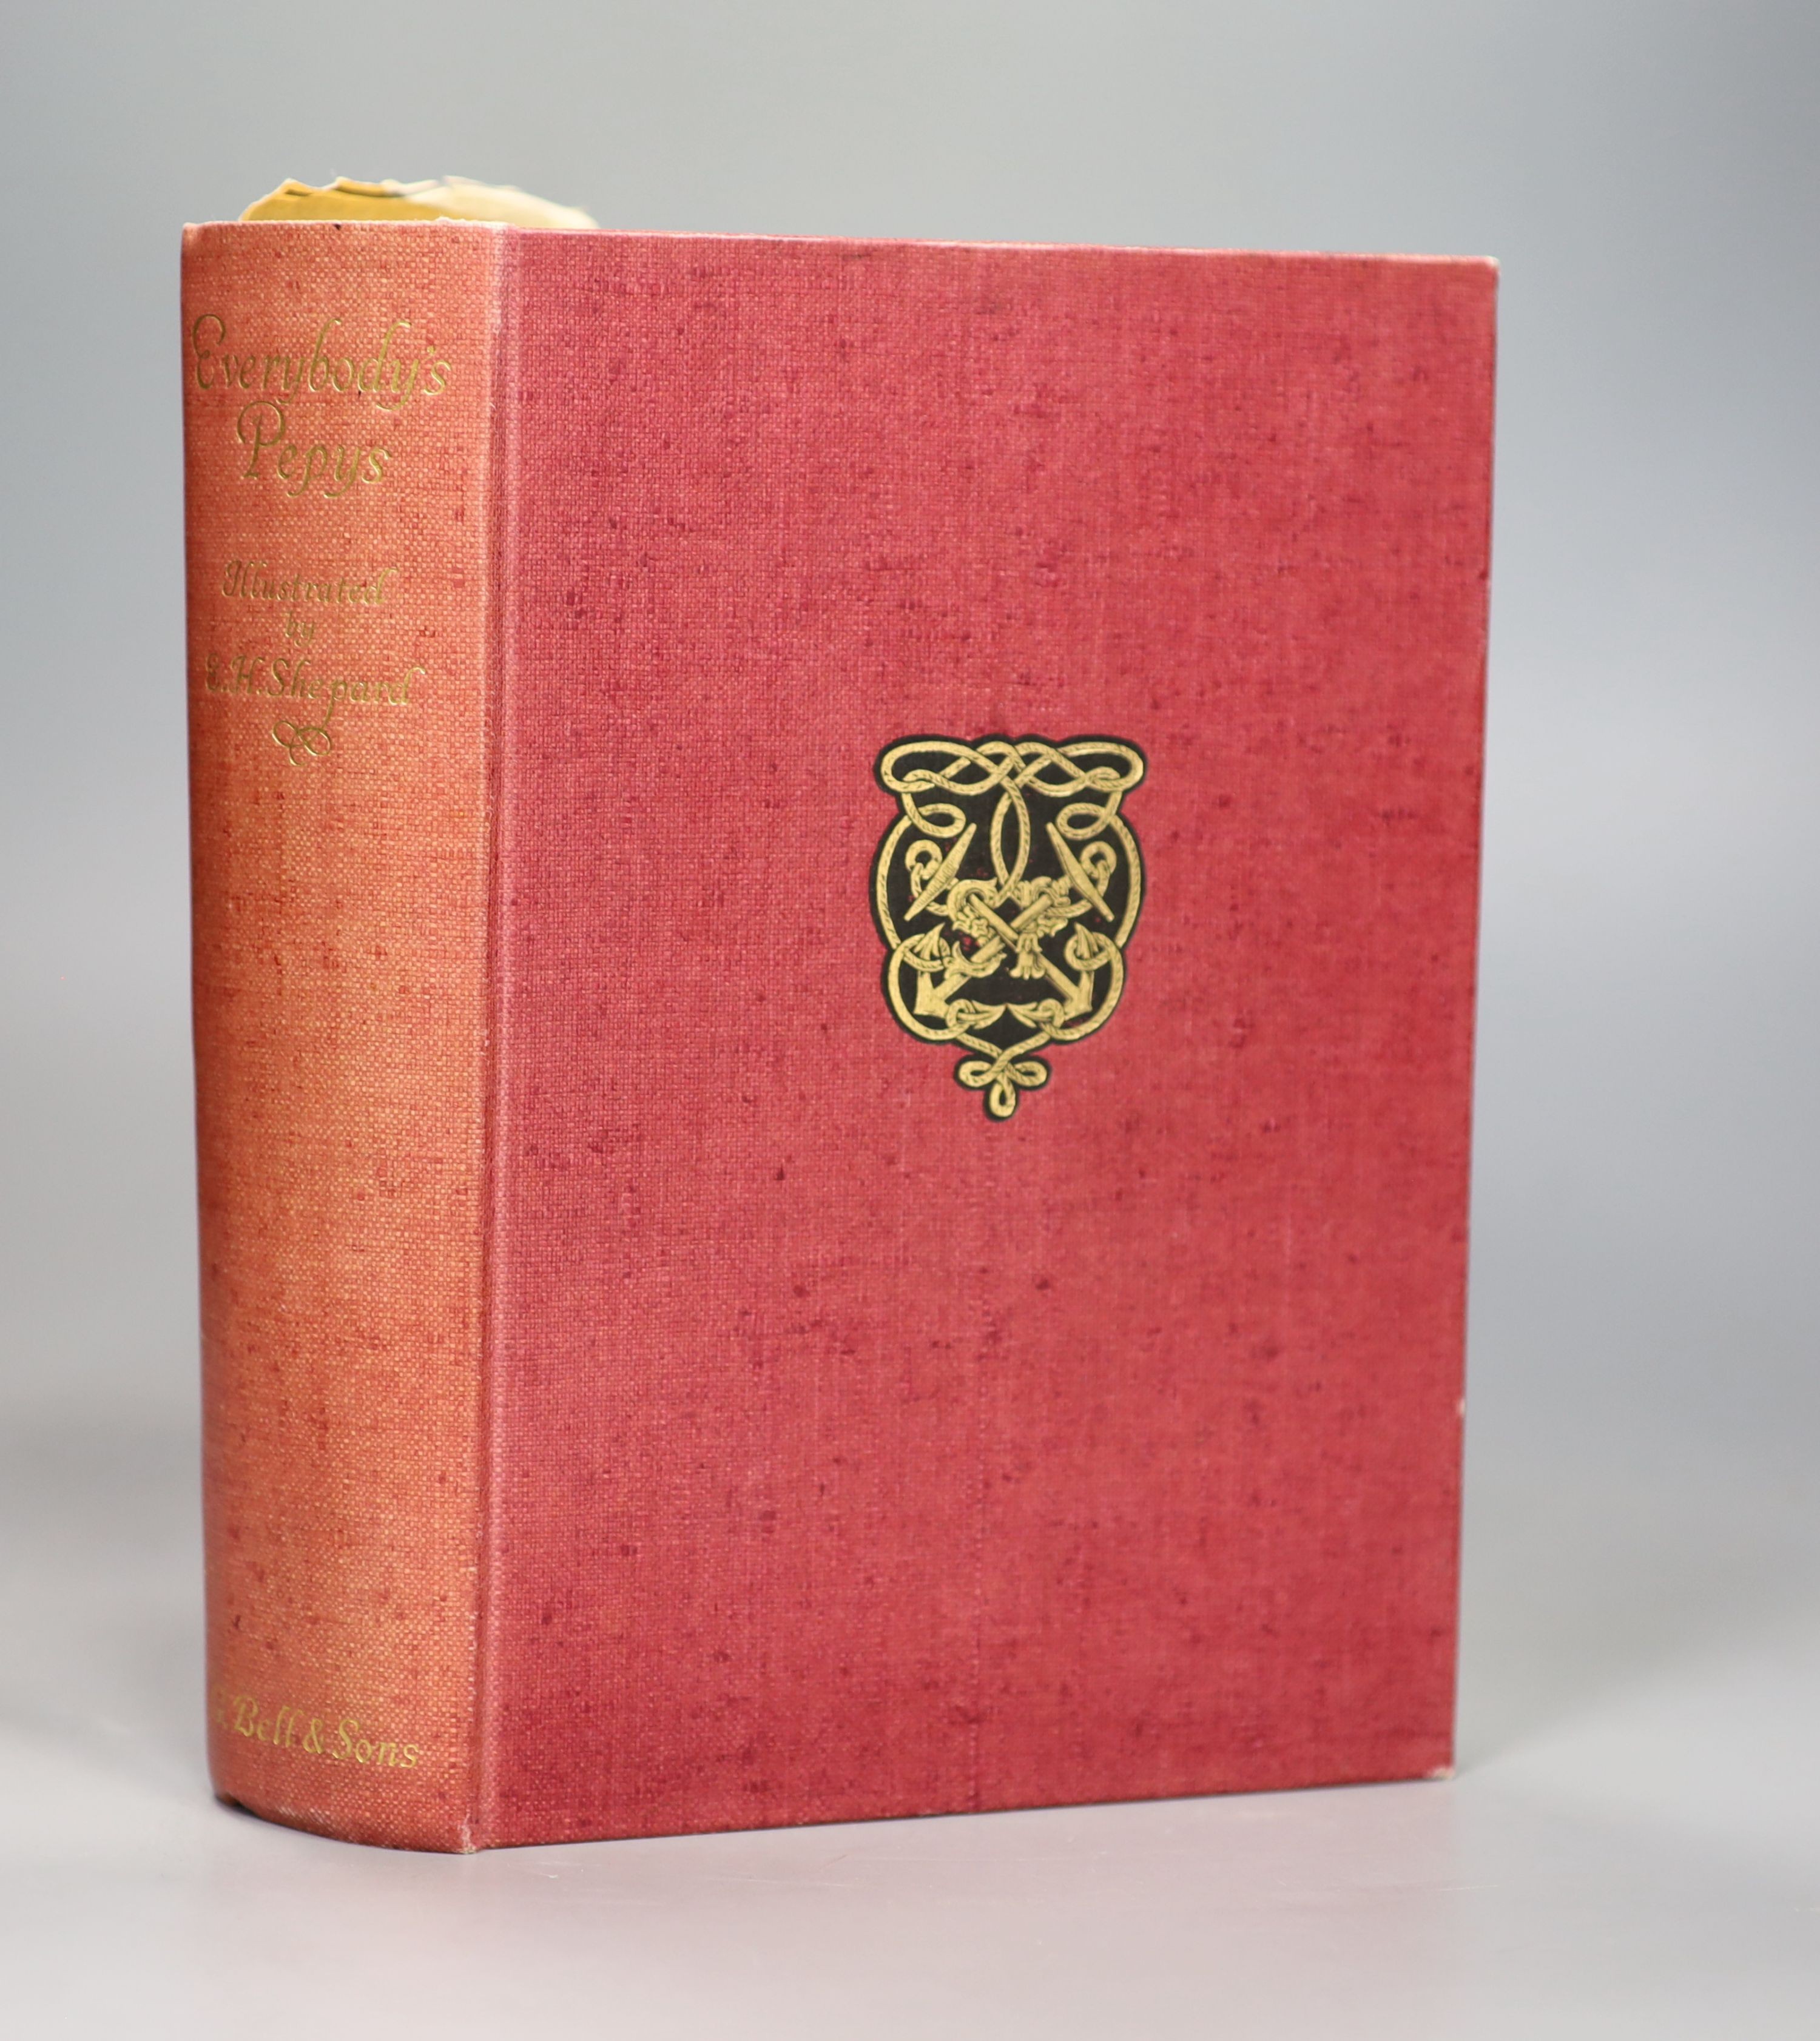 Pepys, Samuel (edited and abridged by O.F. Morshead) - Everybody’s Pepys, 8vo, red cloth, one of 350, signed by the illustrator Ernest Shepard, G. Bell & Sons, London, 1926